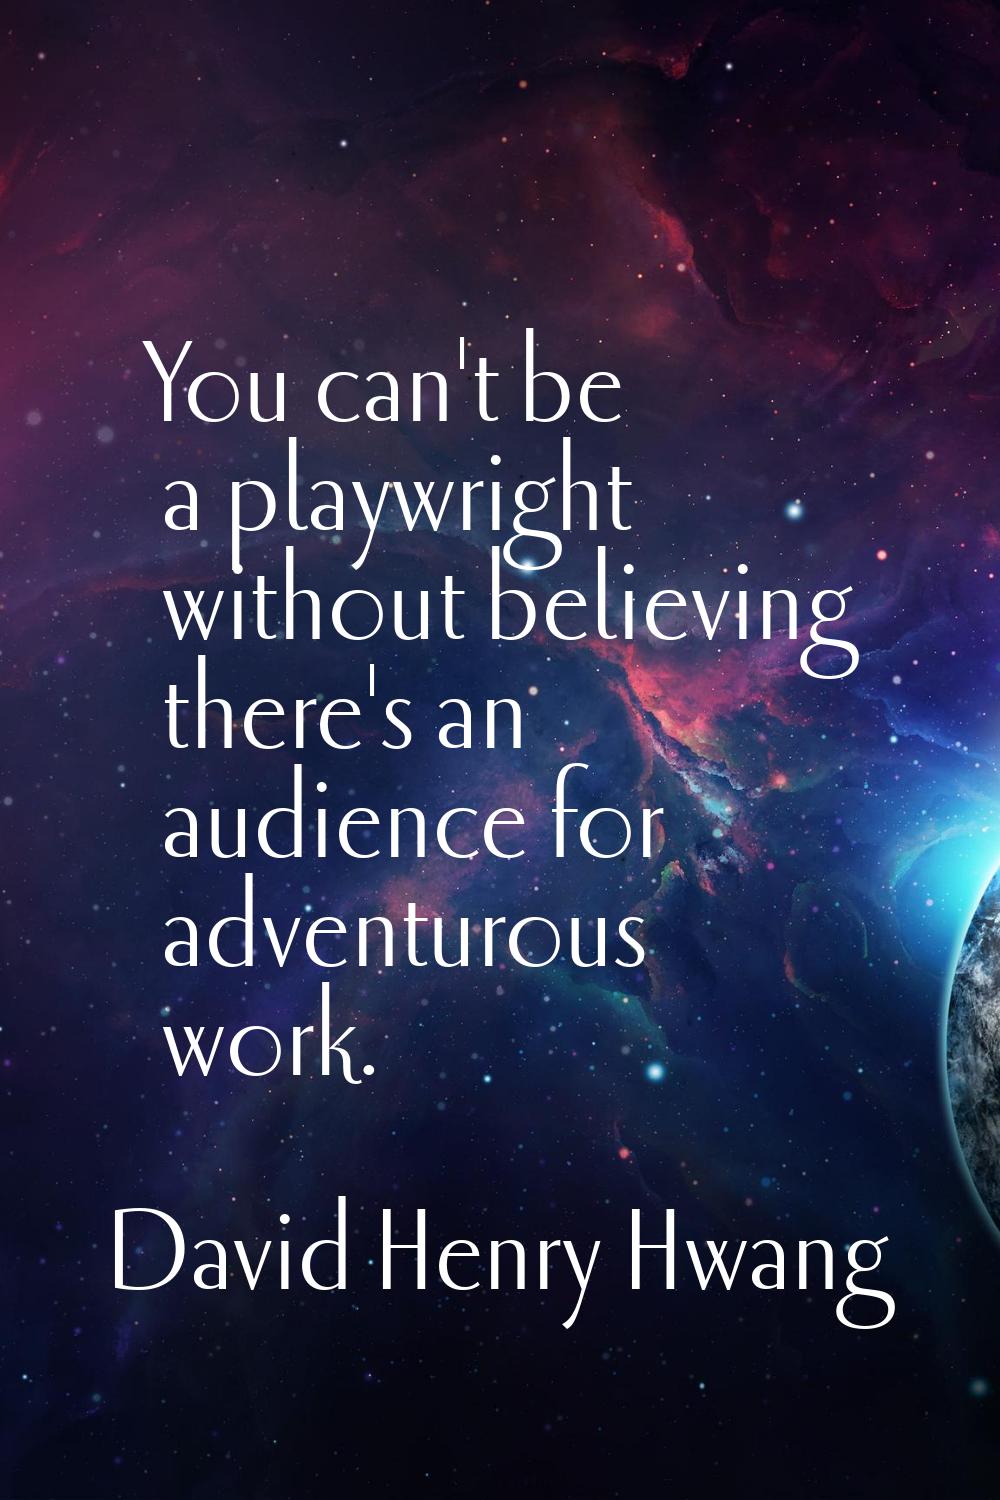 You can't be a playwright without believing there's an audience for adventurous work.